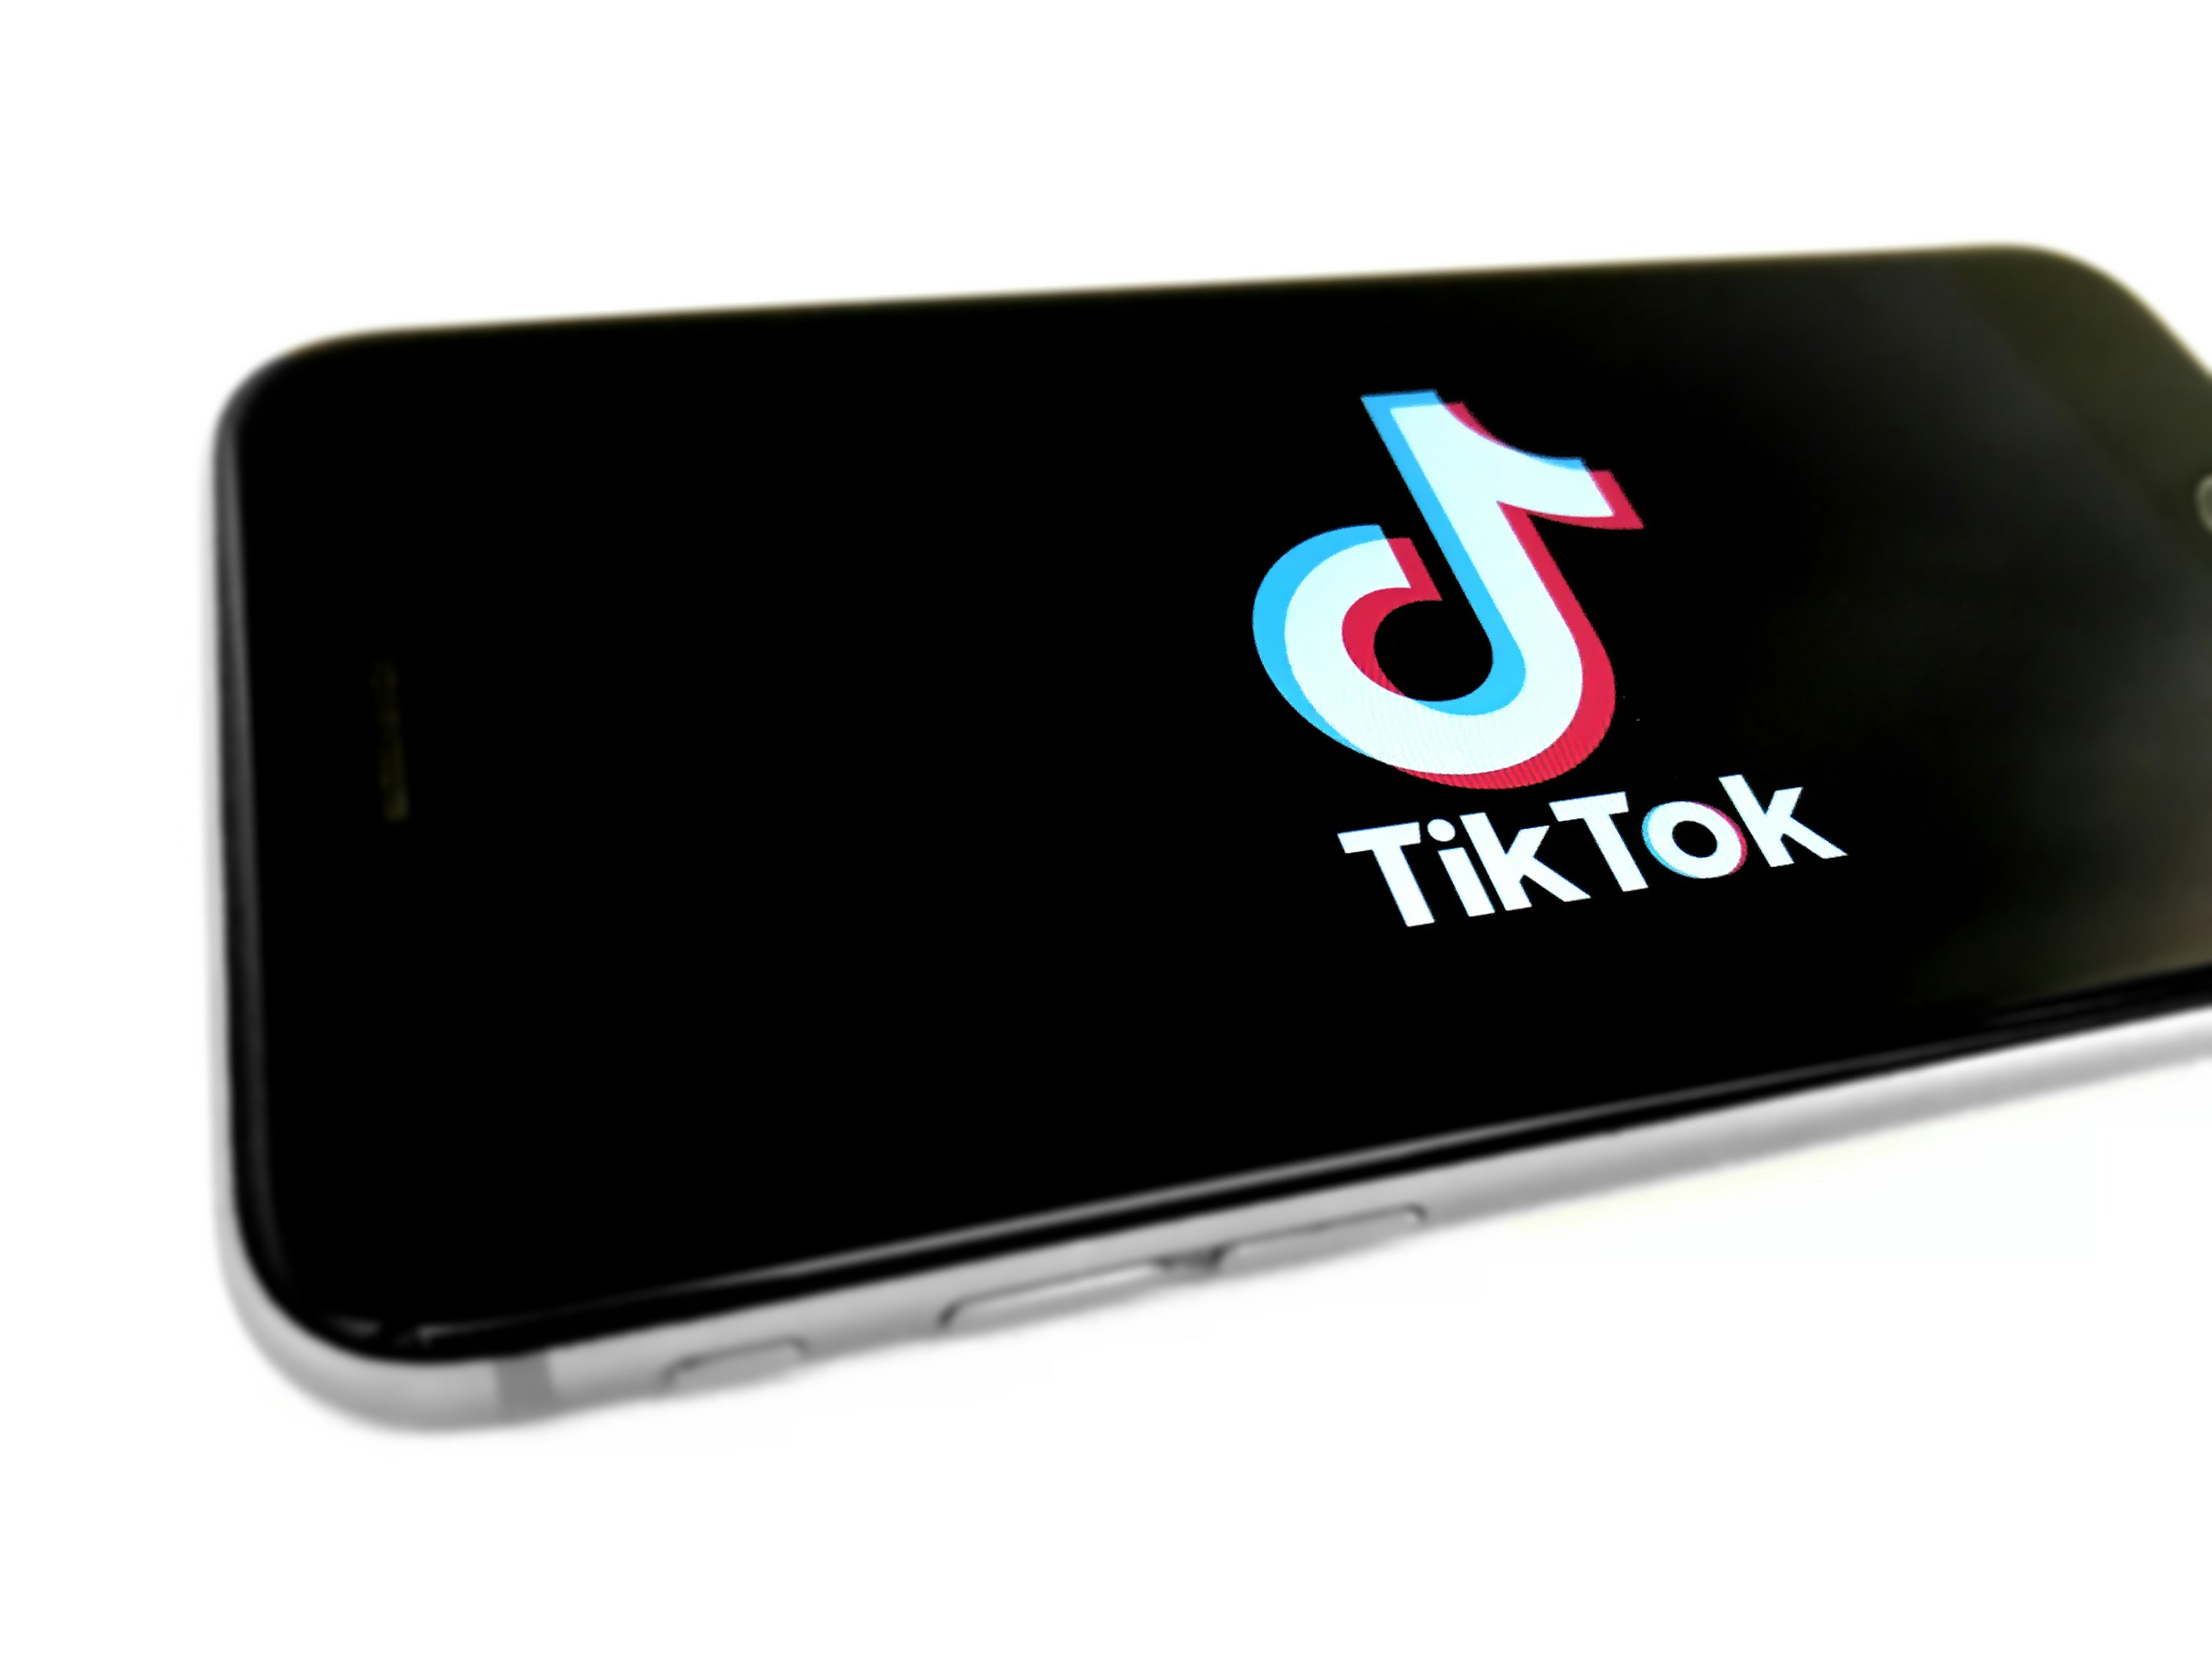 Researchers Want to Study Popular App TikTok, But Face Challenges Due to Strict Rules